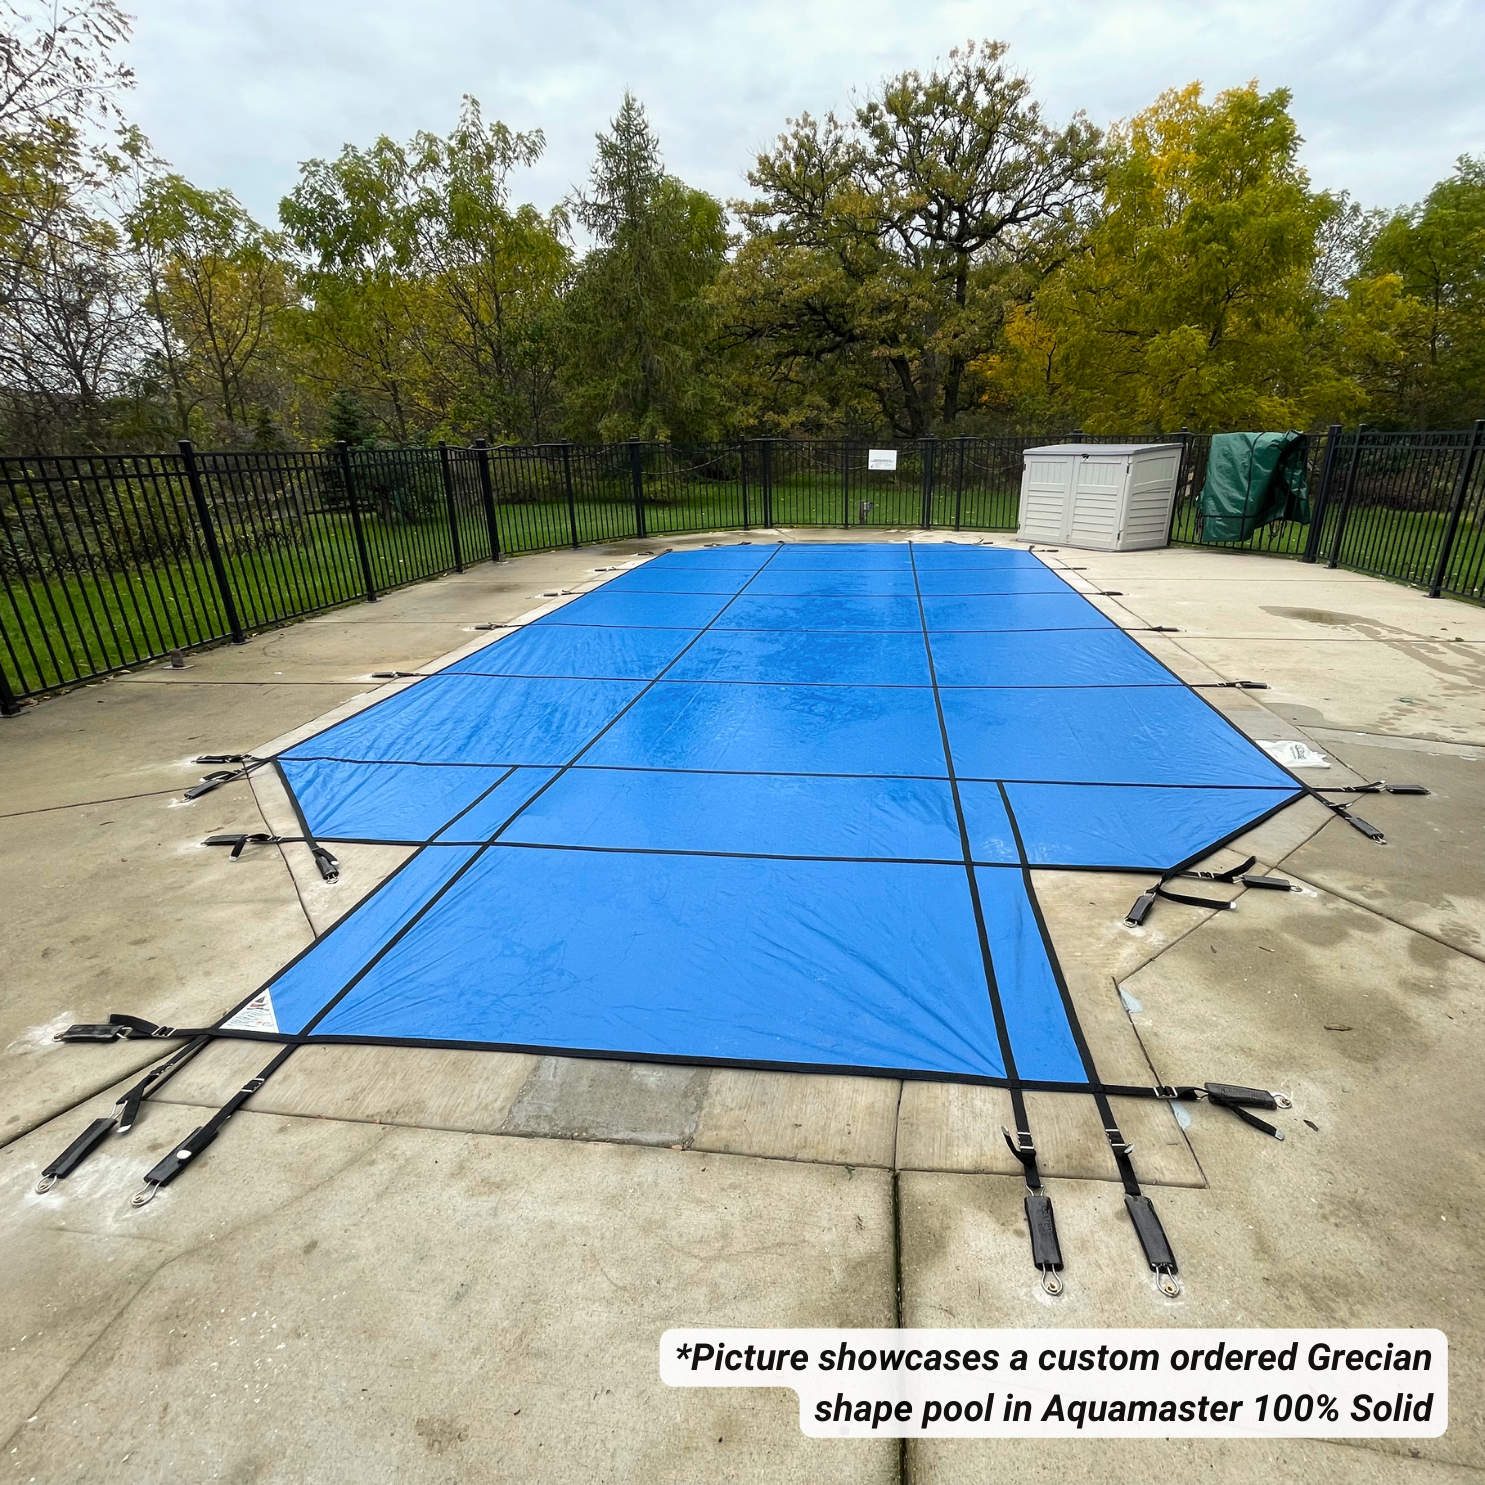 16' x 36' Rectangle Aquamaster 100% Solid Safety Pool Cover